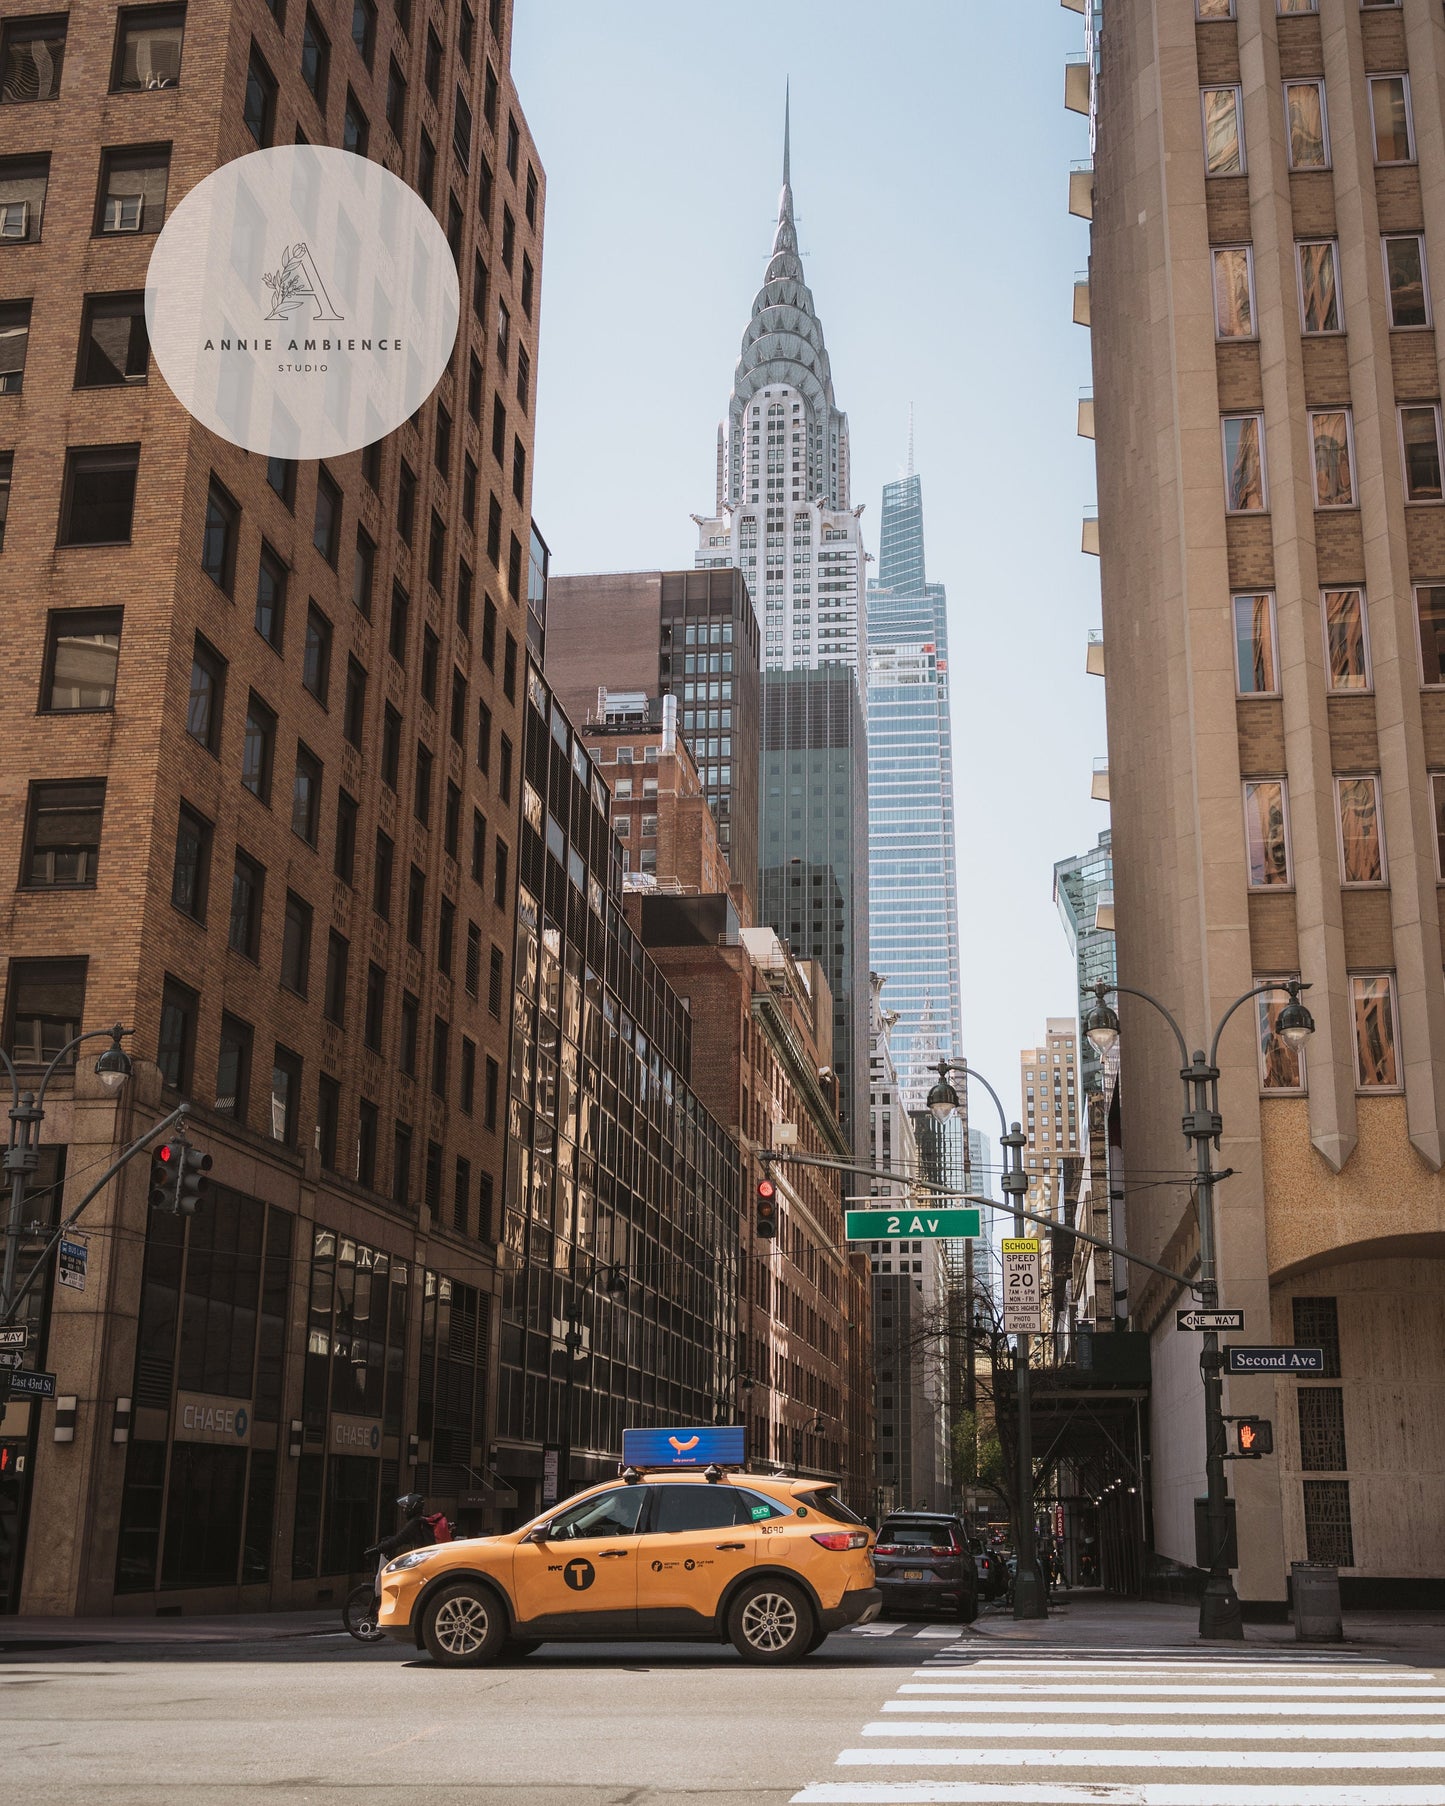 NYC Street Photography New York Yellow Taxi Print Chrysler Building Poster NYC Poster Manhattan Wallart Streets of NY Print Classic New York